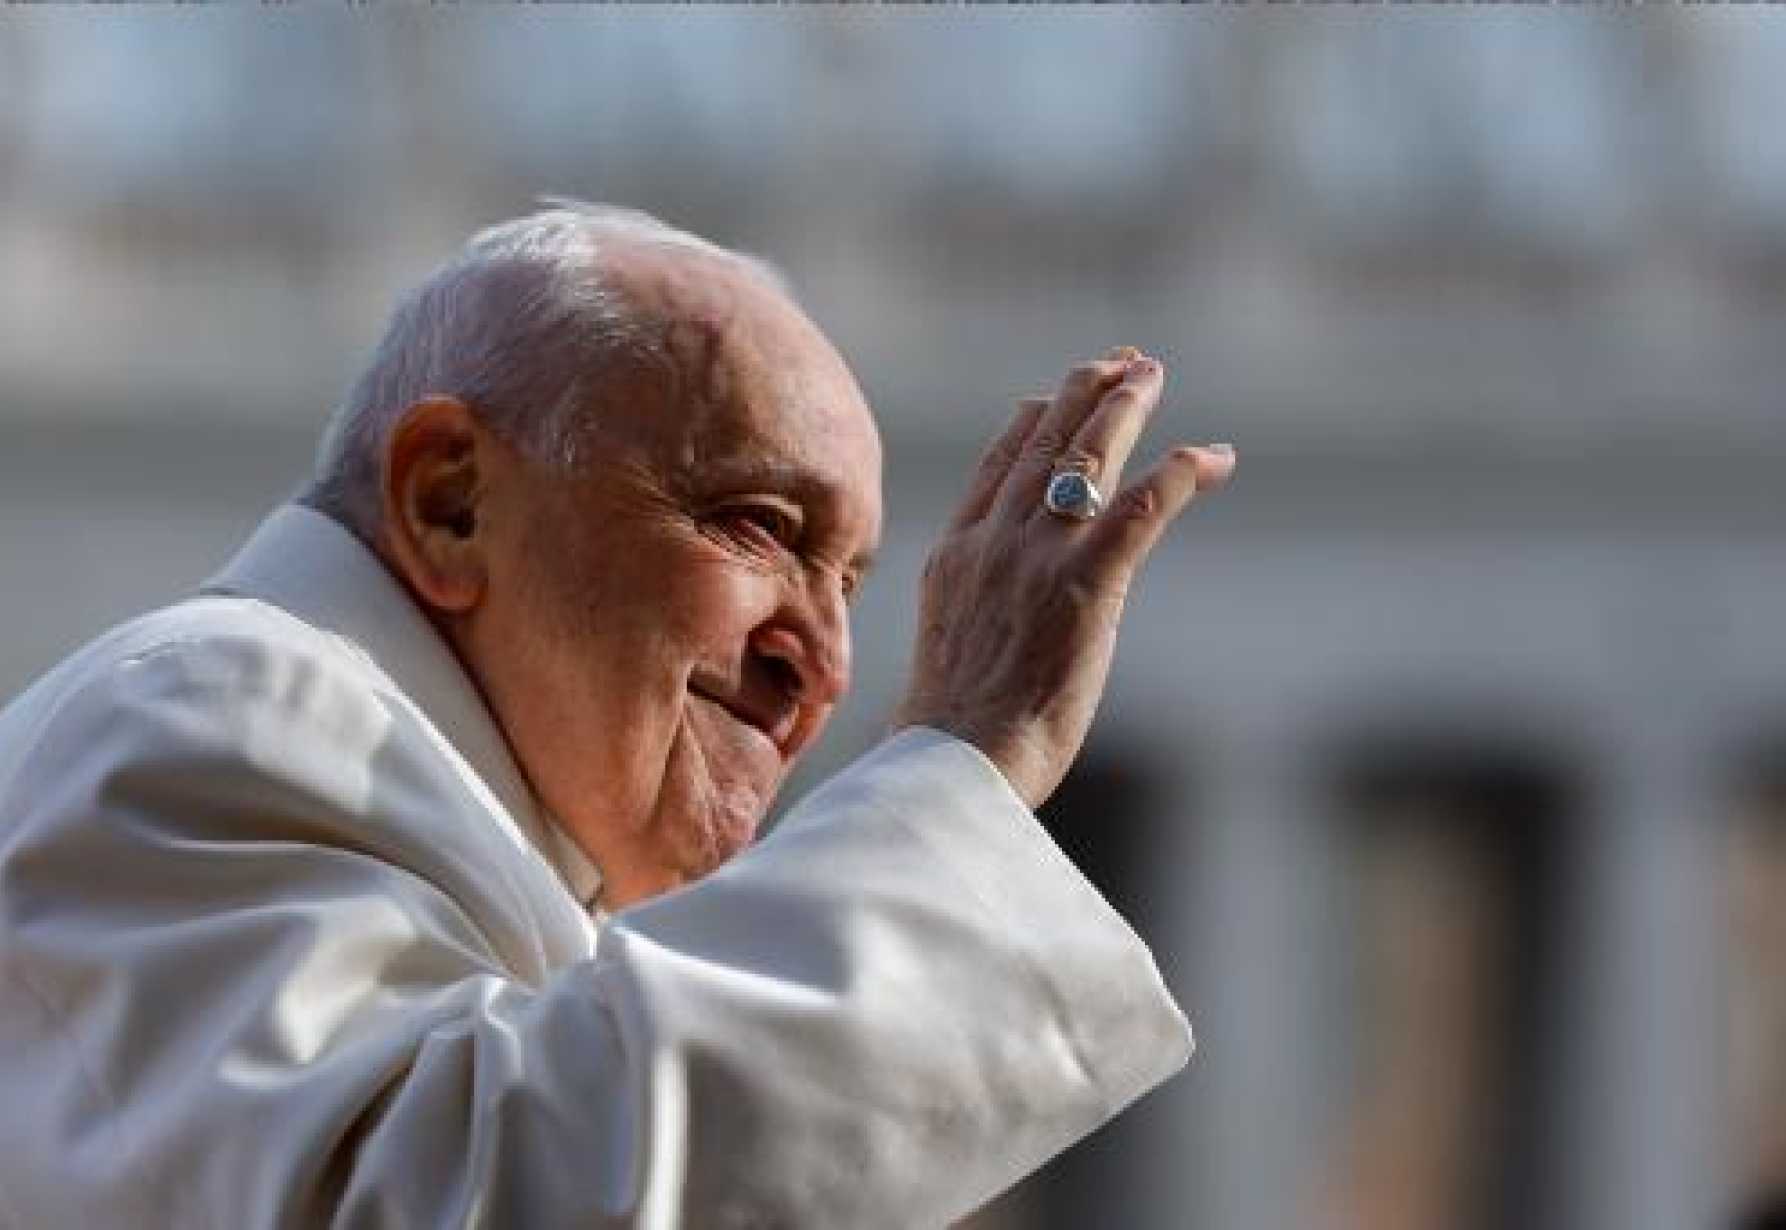 Memory book: Pope reviews his life and shares dreams for future